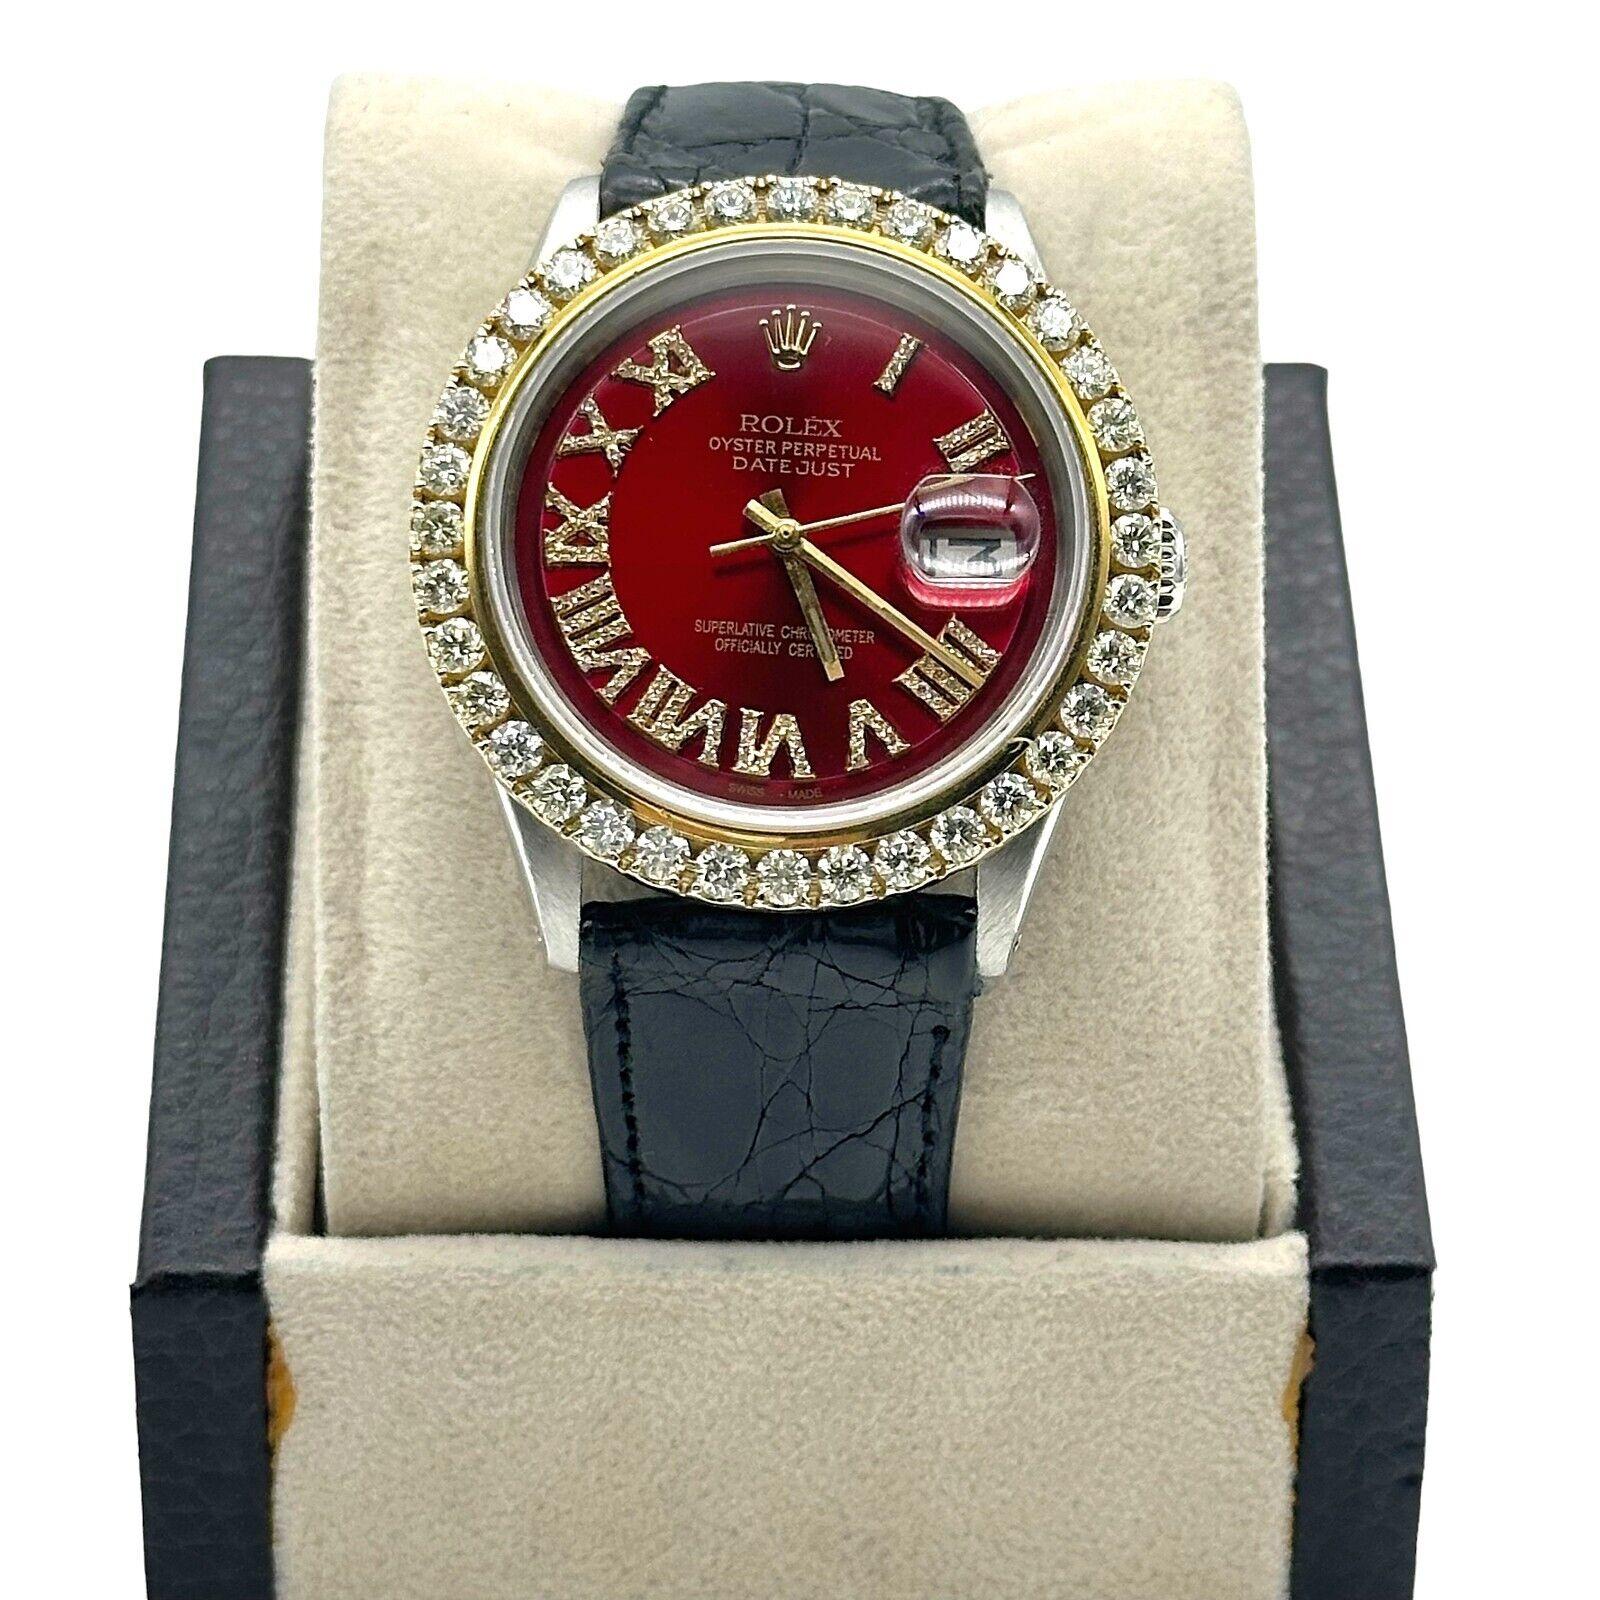 Style Number: 1601

Serial: 928***

Model: Datejust

Case Material: Stainless Steel

Band: Black Leather Strap

Bezel: 18K Gold Custom Diamond Bezel - Approx 3.50ctw

Dial: Red Refinished Roman Diamond Dial

Face: Sapphire Crystal

Case Size: